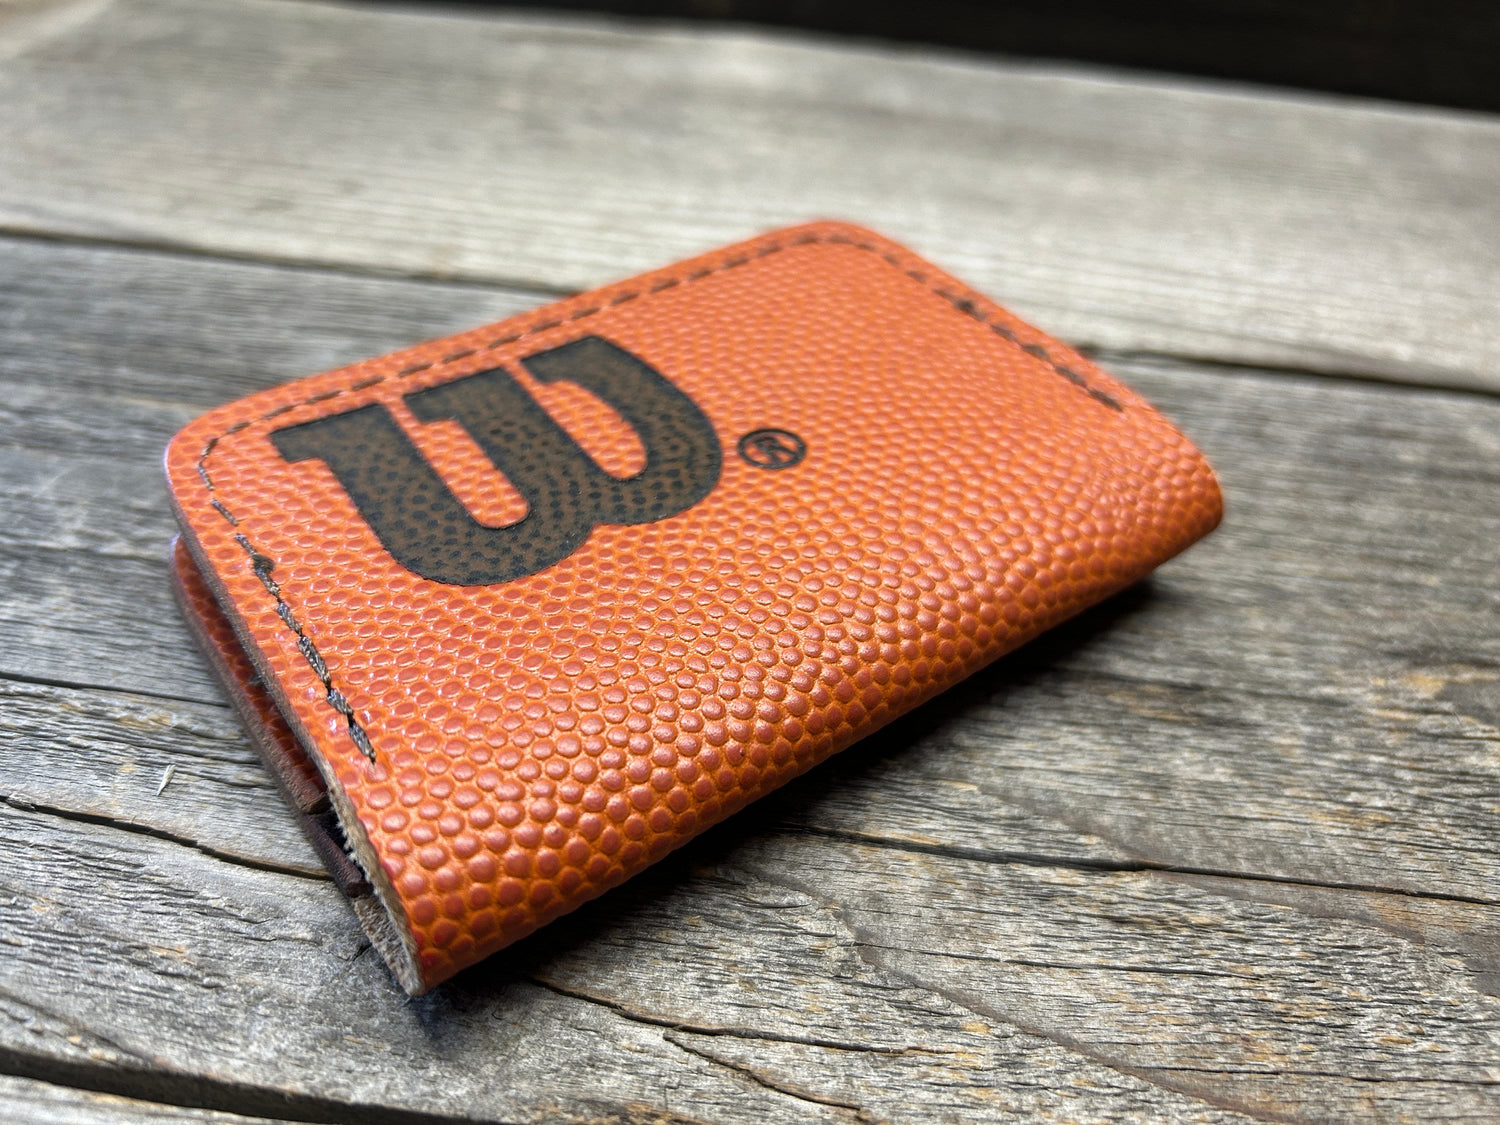 NEW STYLE!! Horween (Wilson) NBA Basketball Leather Wallet!!